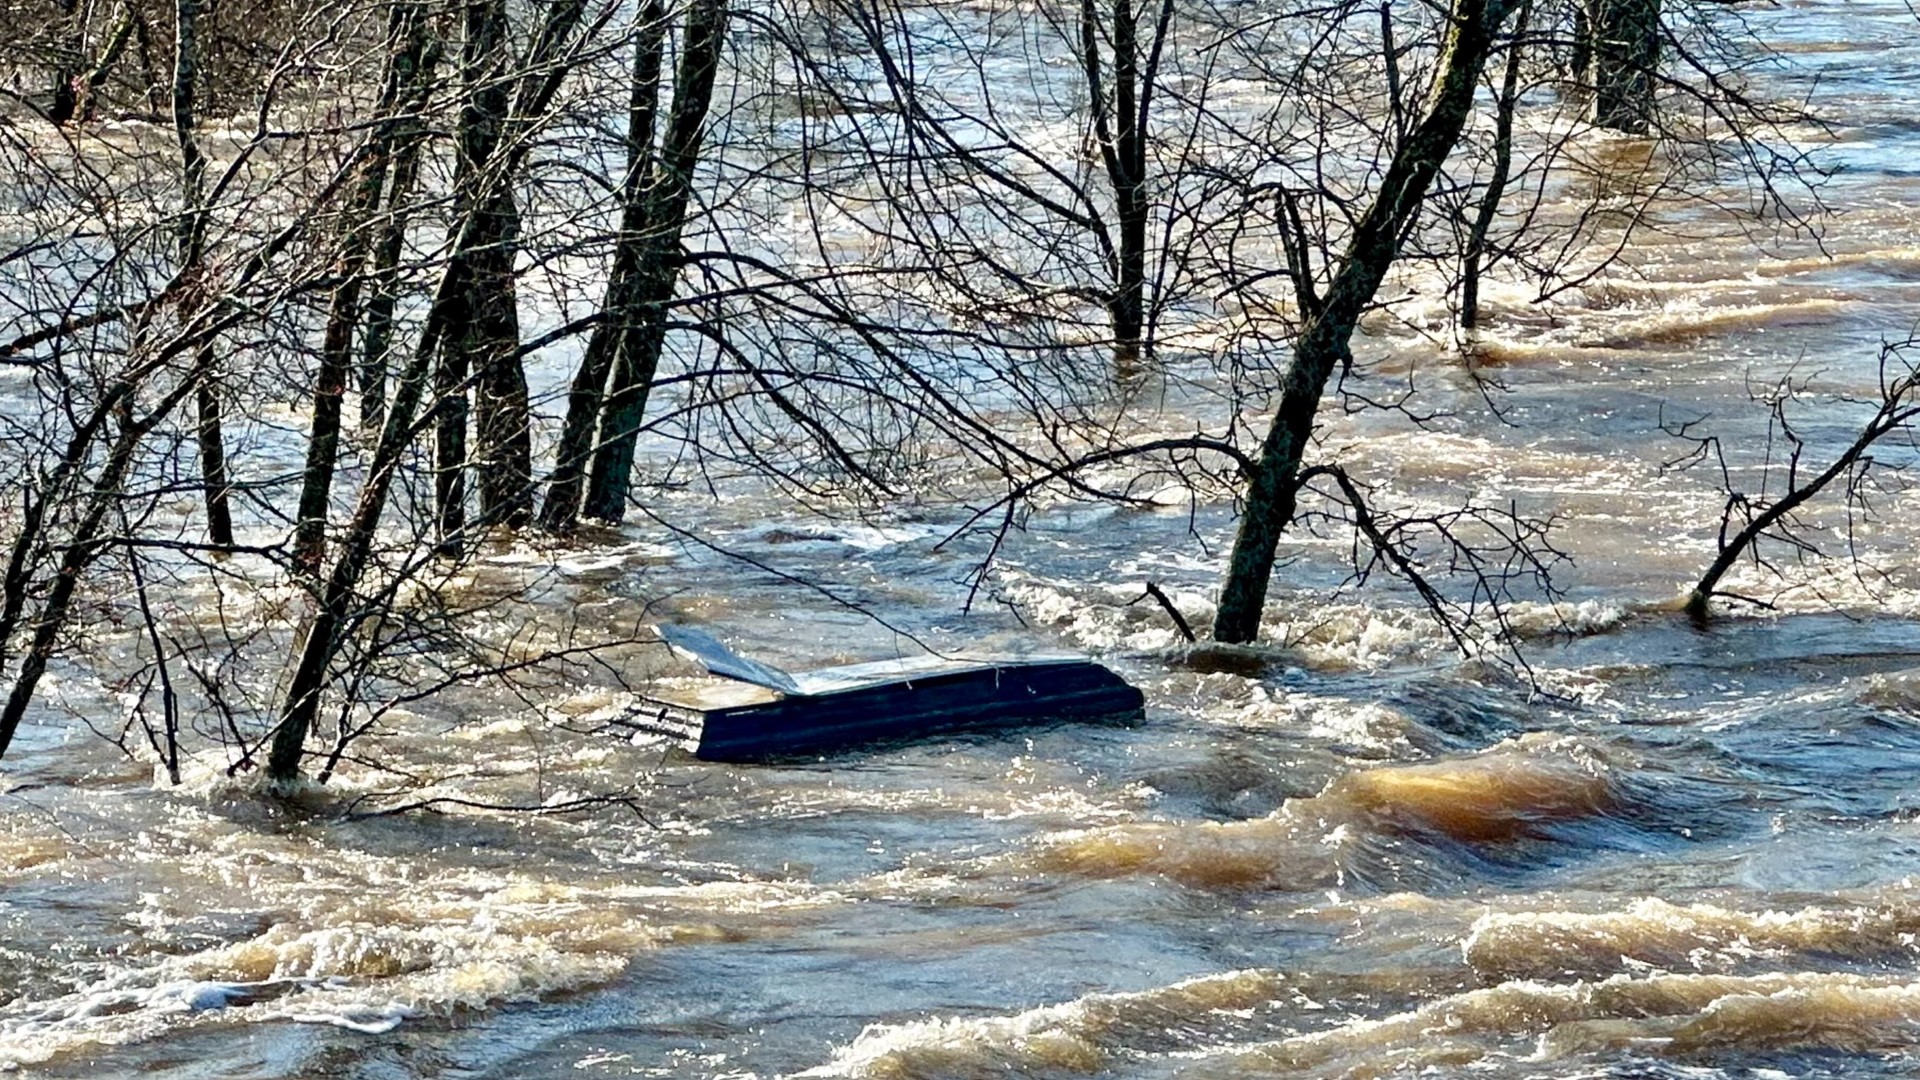 Tracy Grondin, who captured the footage, said she was taking pictures of the flooding when her fiancé spotted a strange object that went over the Great Falls.